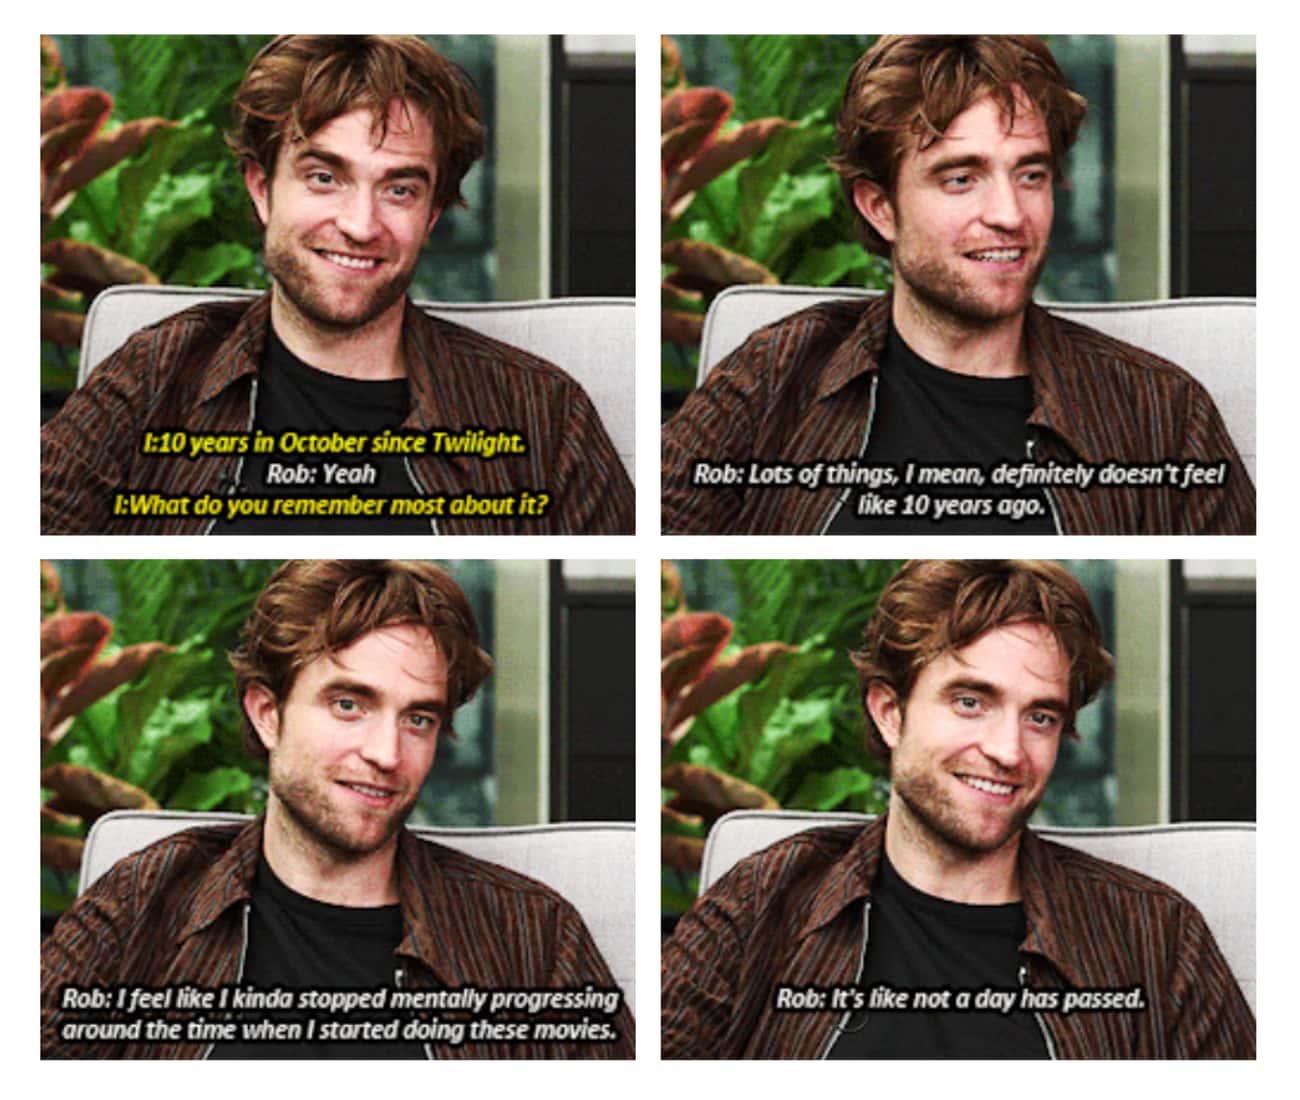 Most Twilight Fans Can See That This Interview Tidbit Isn't The Best Way To Talk About The Series